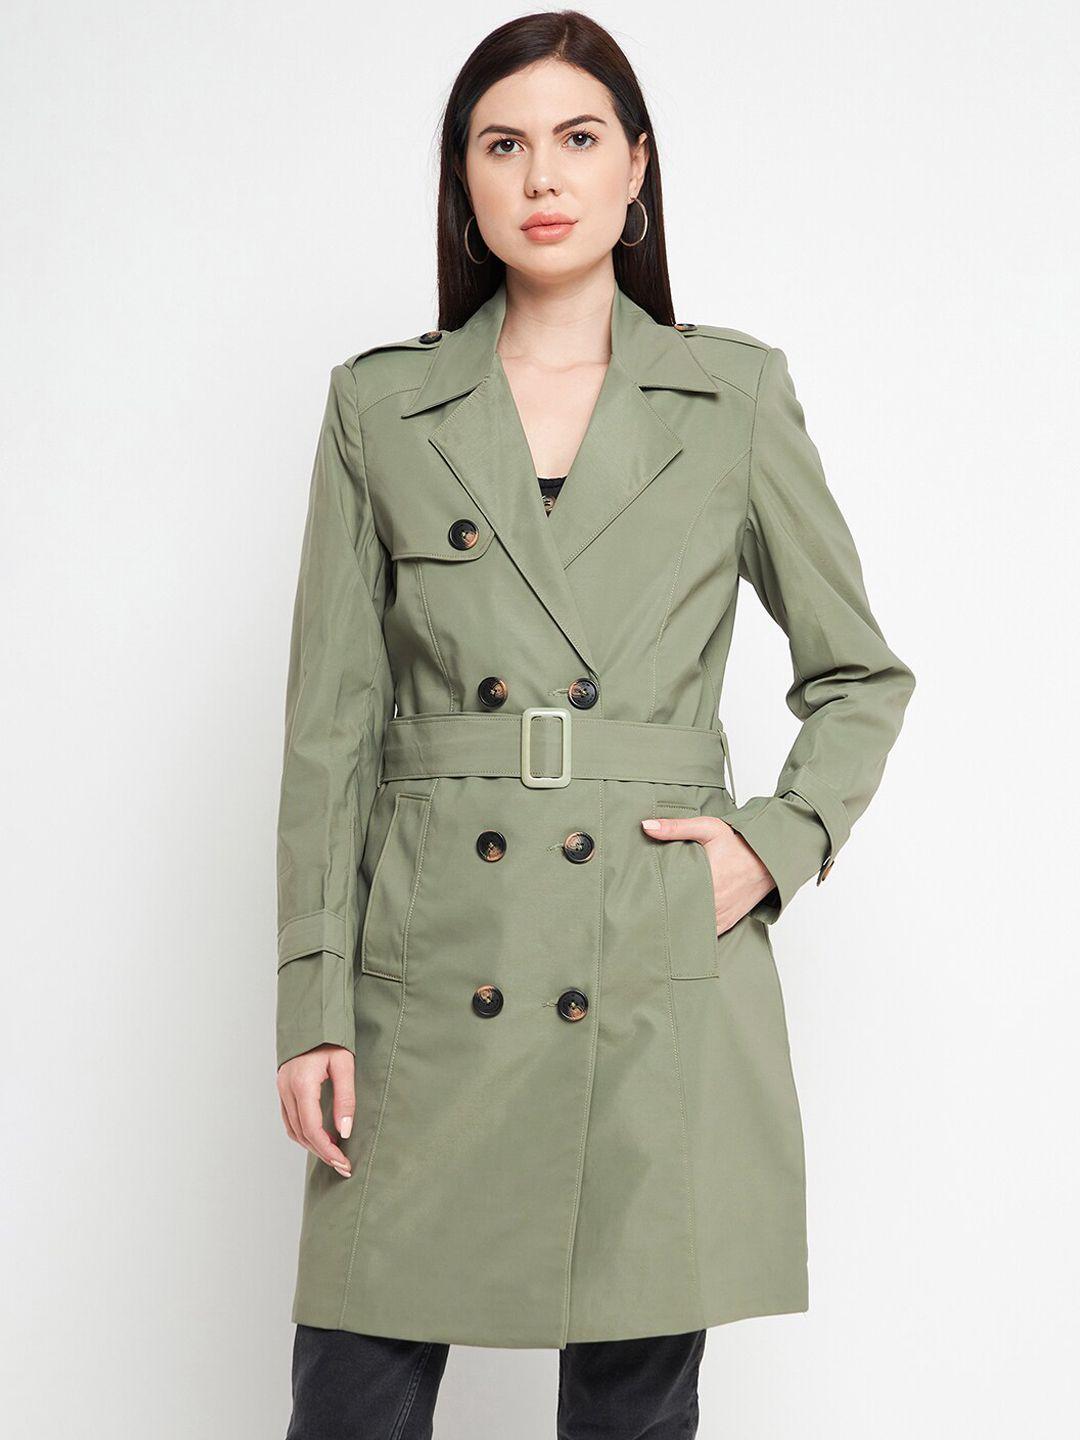 okane women olive green double-breasted trench coats